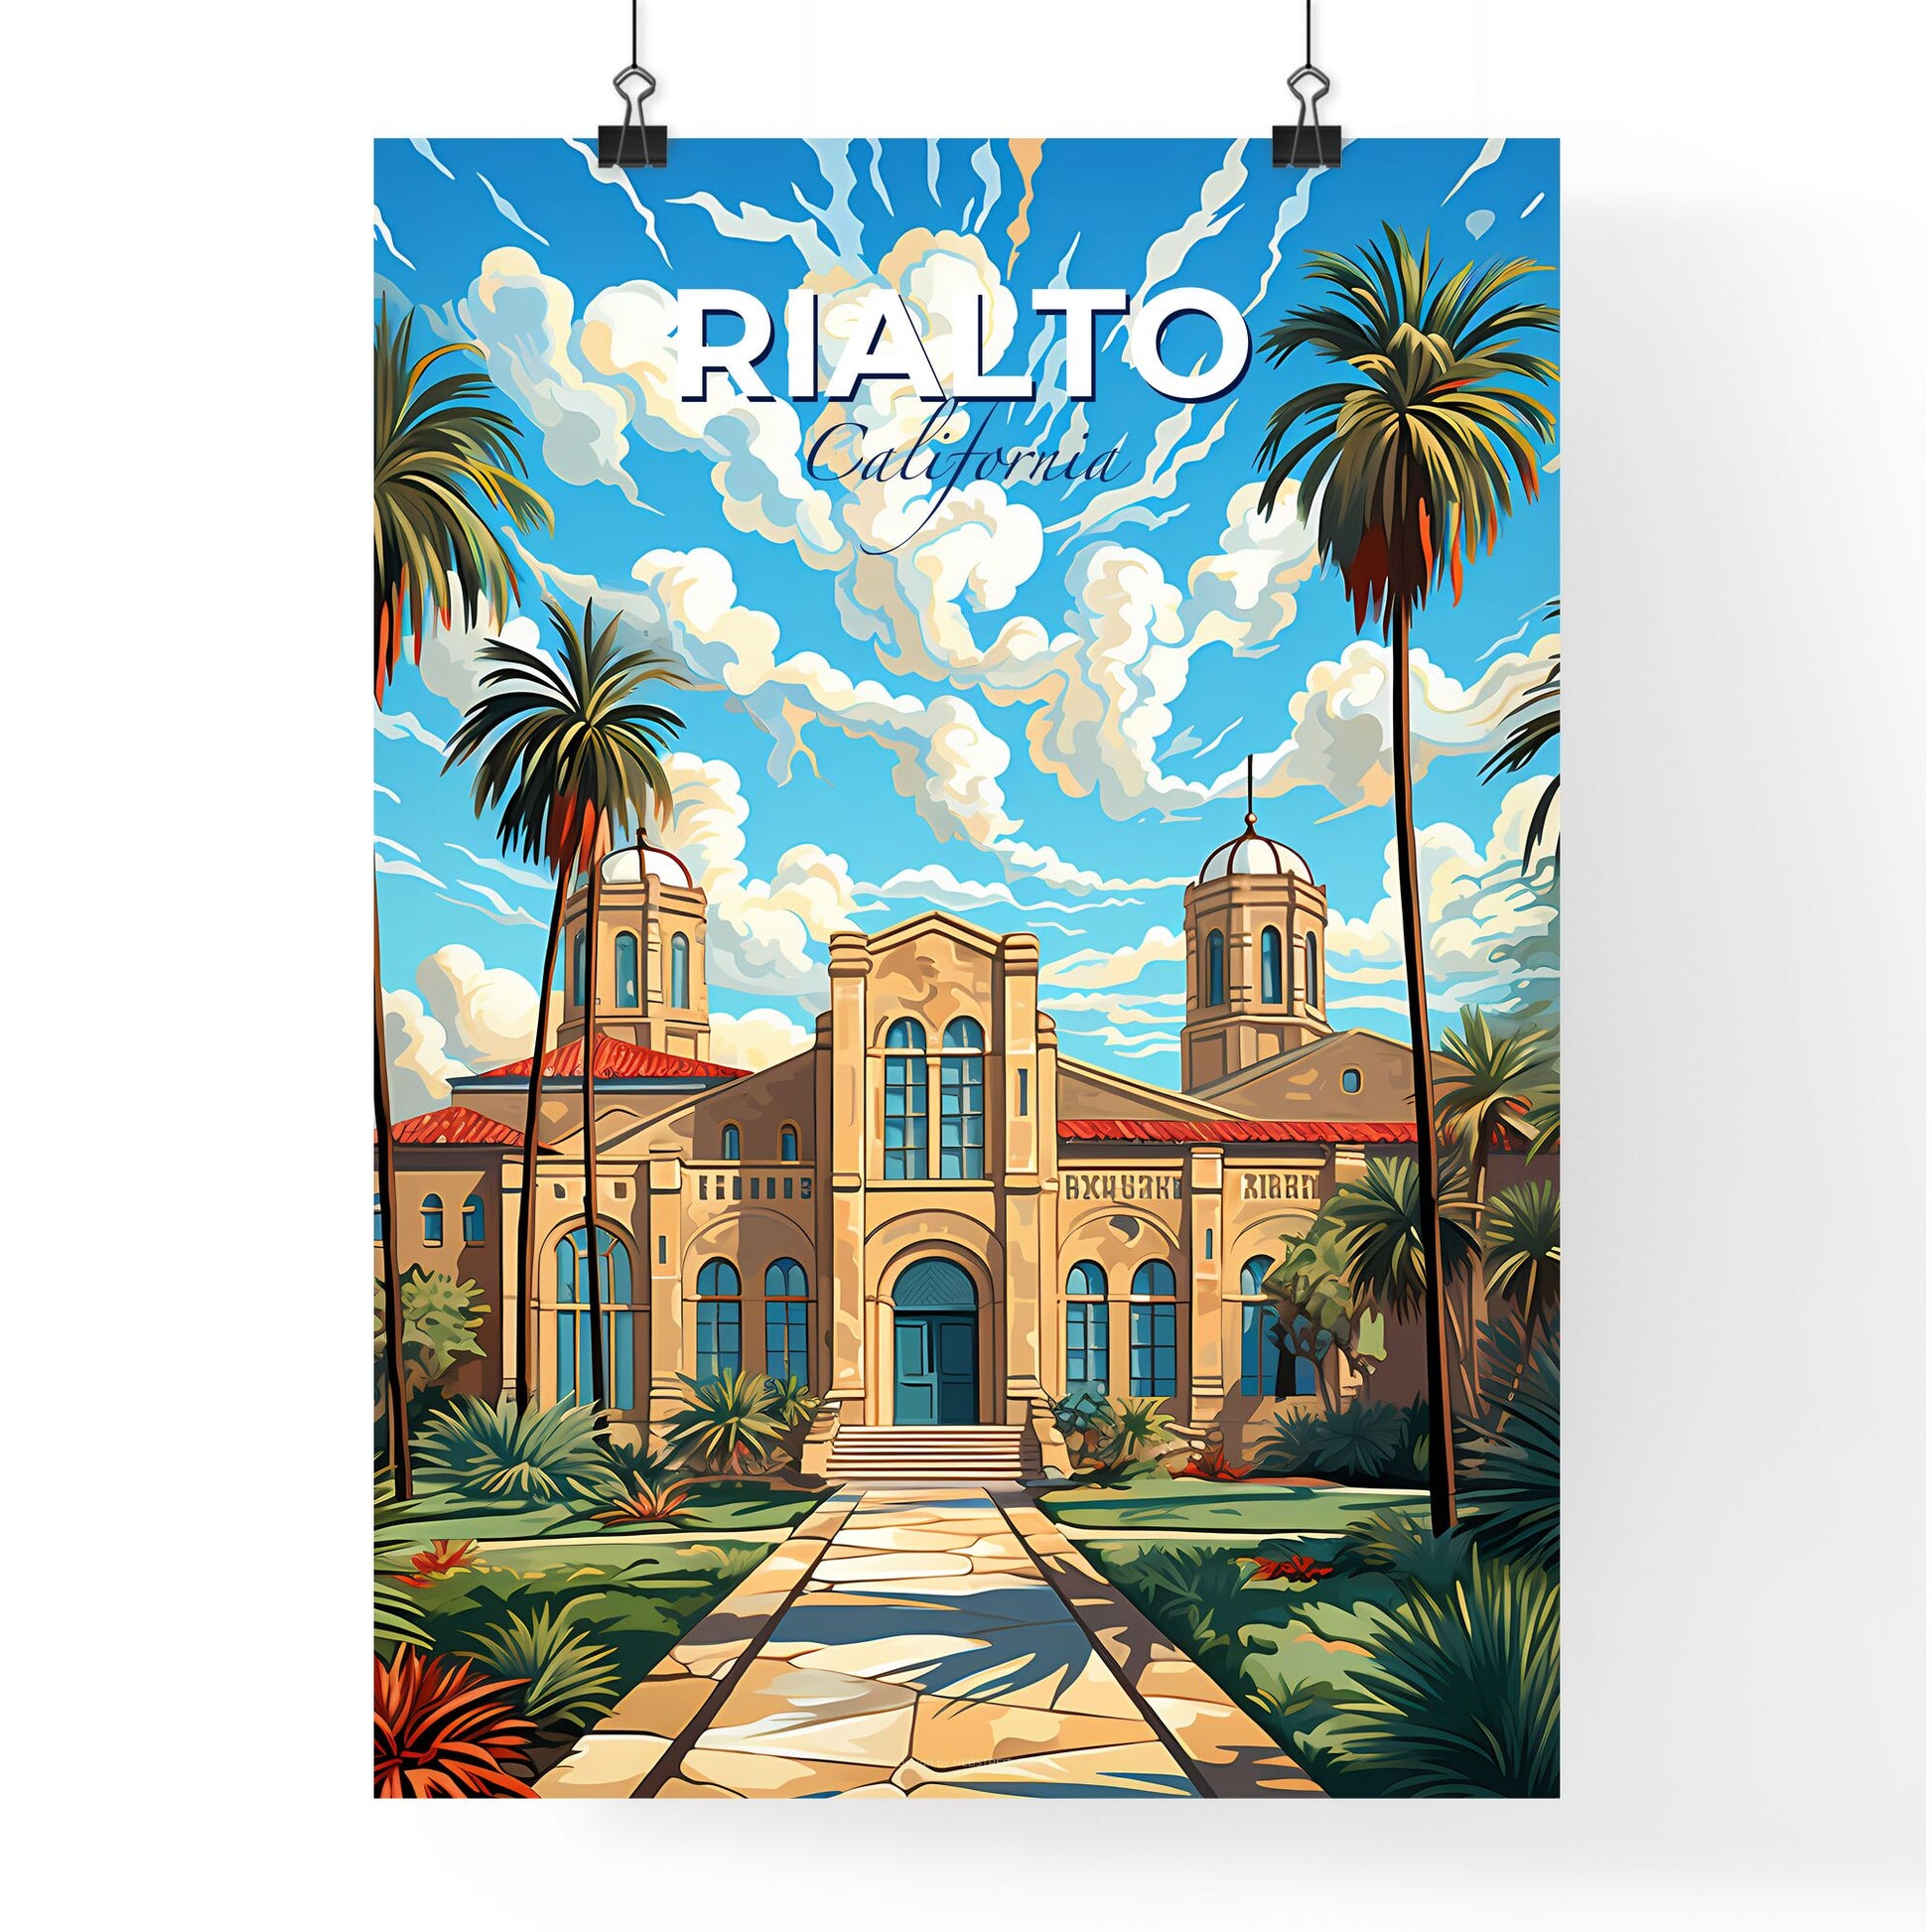 Rialto, California, A Poster of a painting of a building with palm trees Default Title